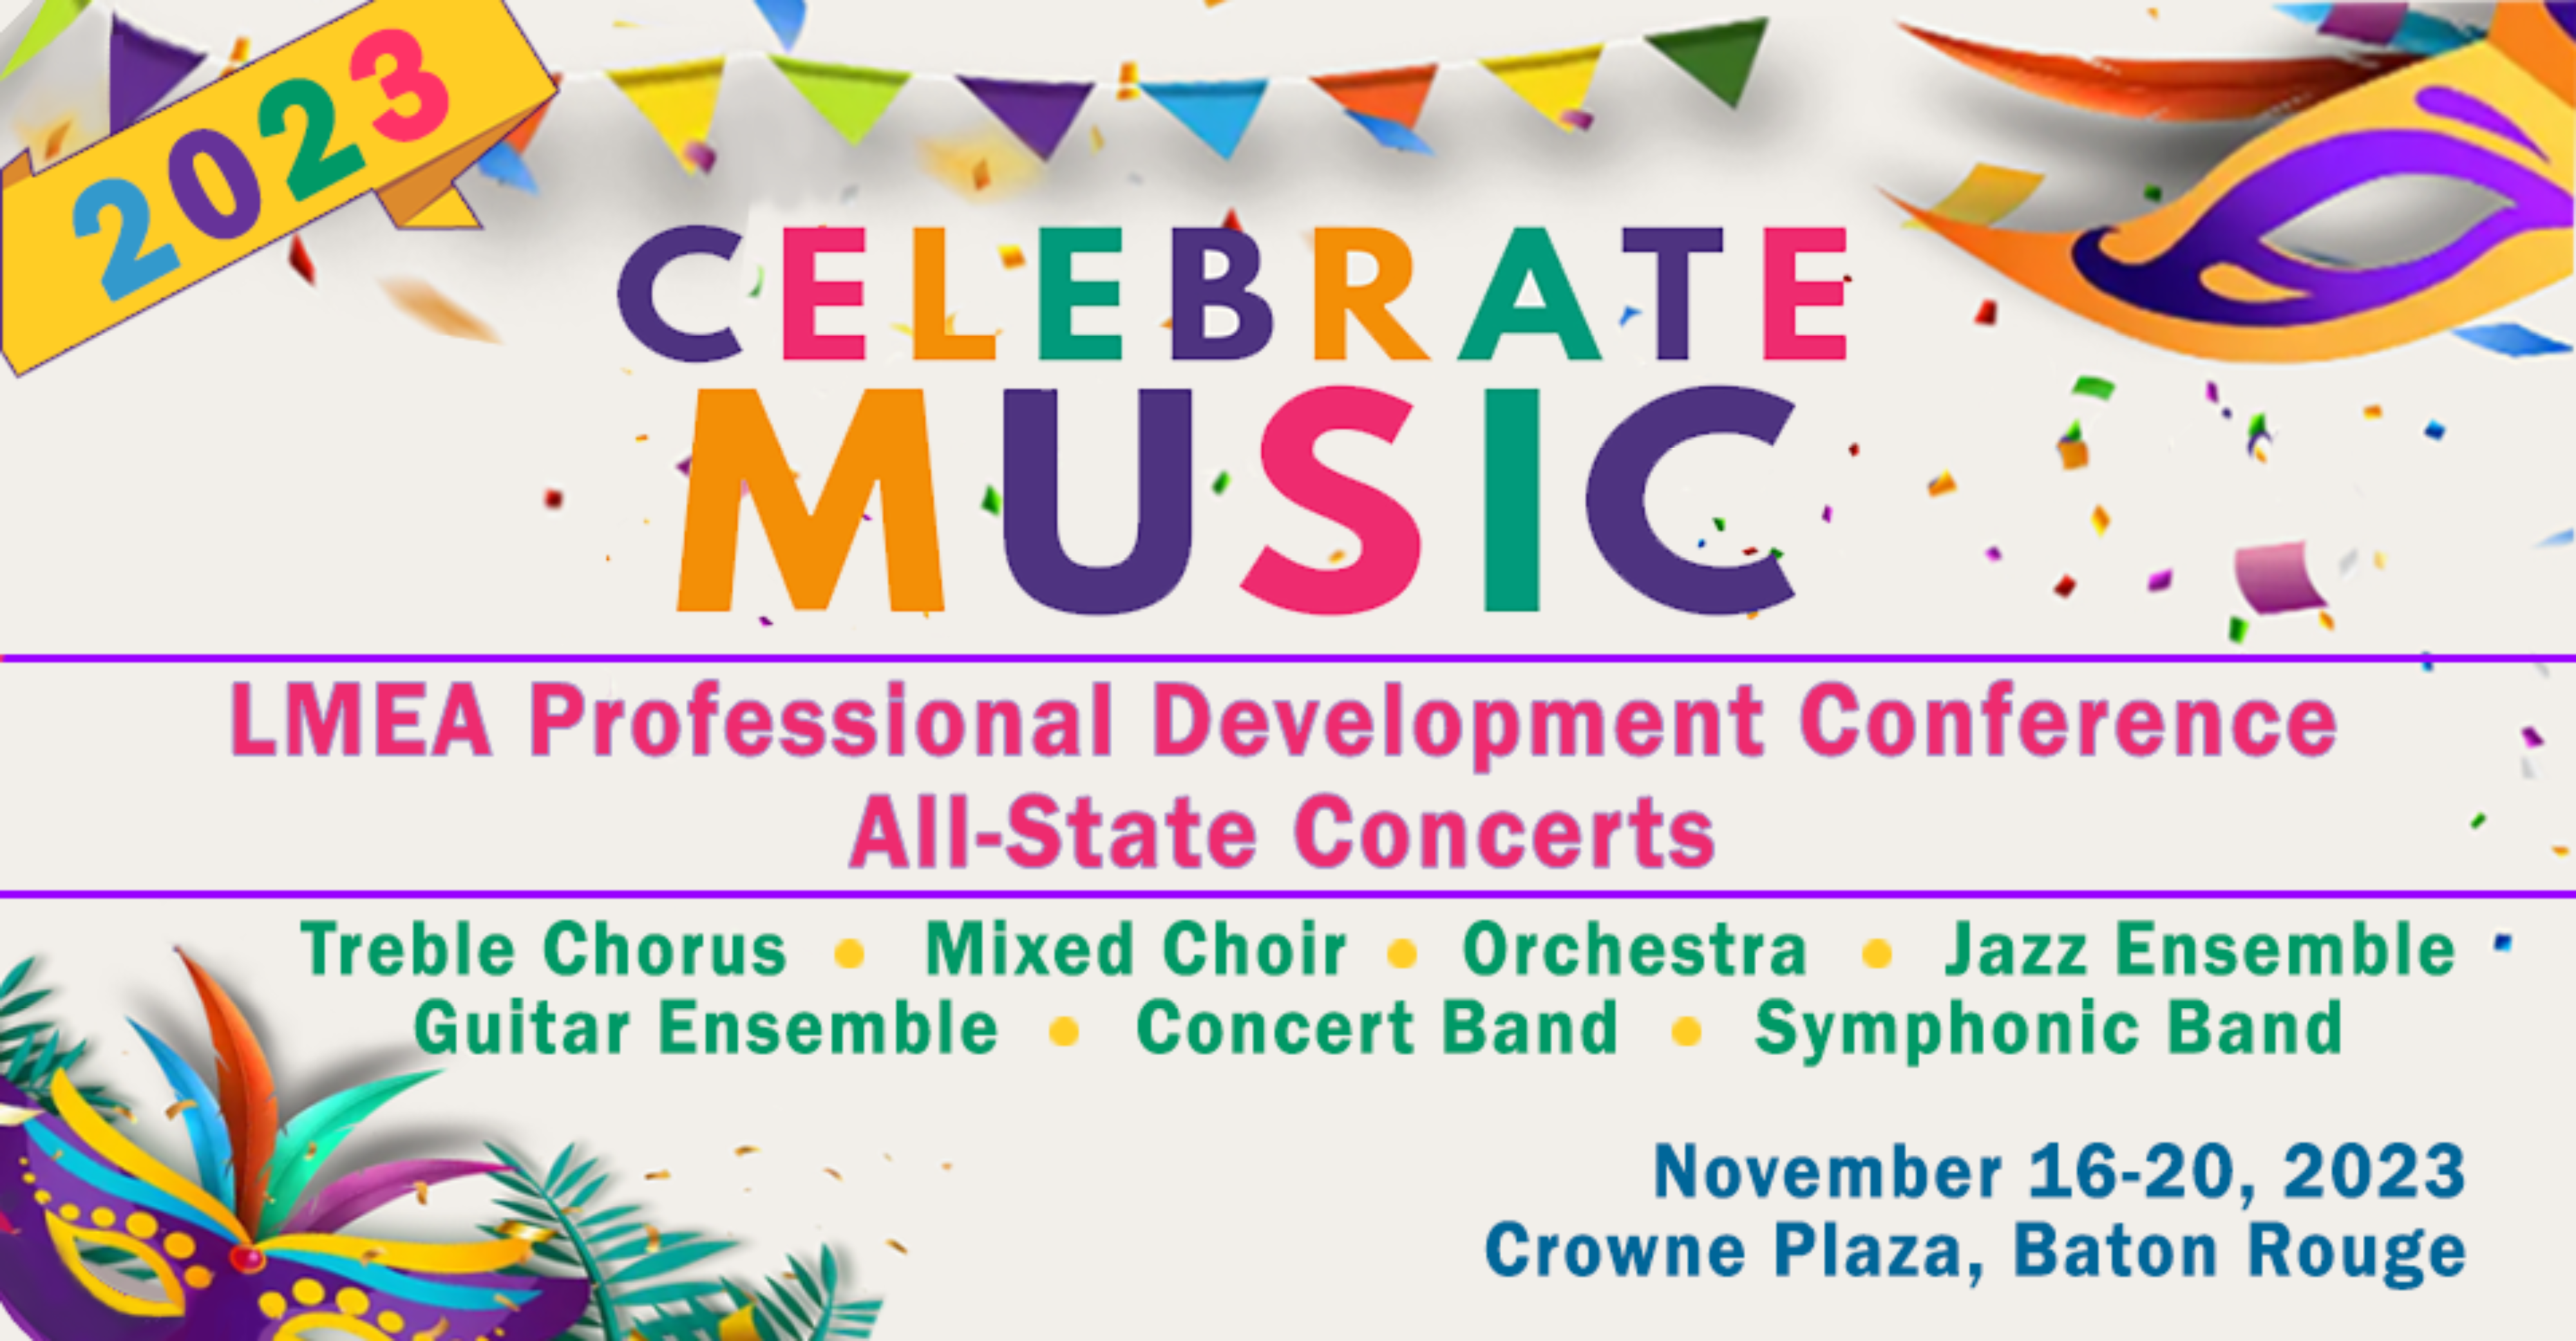 Information about LMEA 2023 Professional Development Conference and All-State Concerts